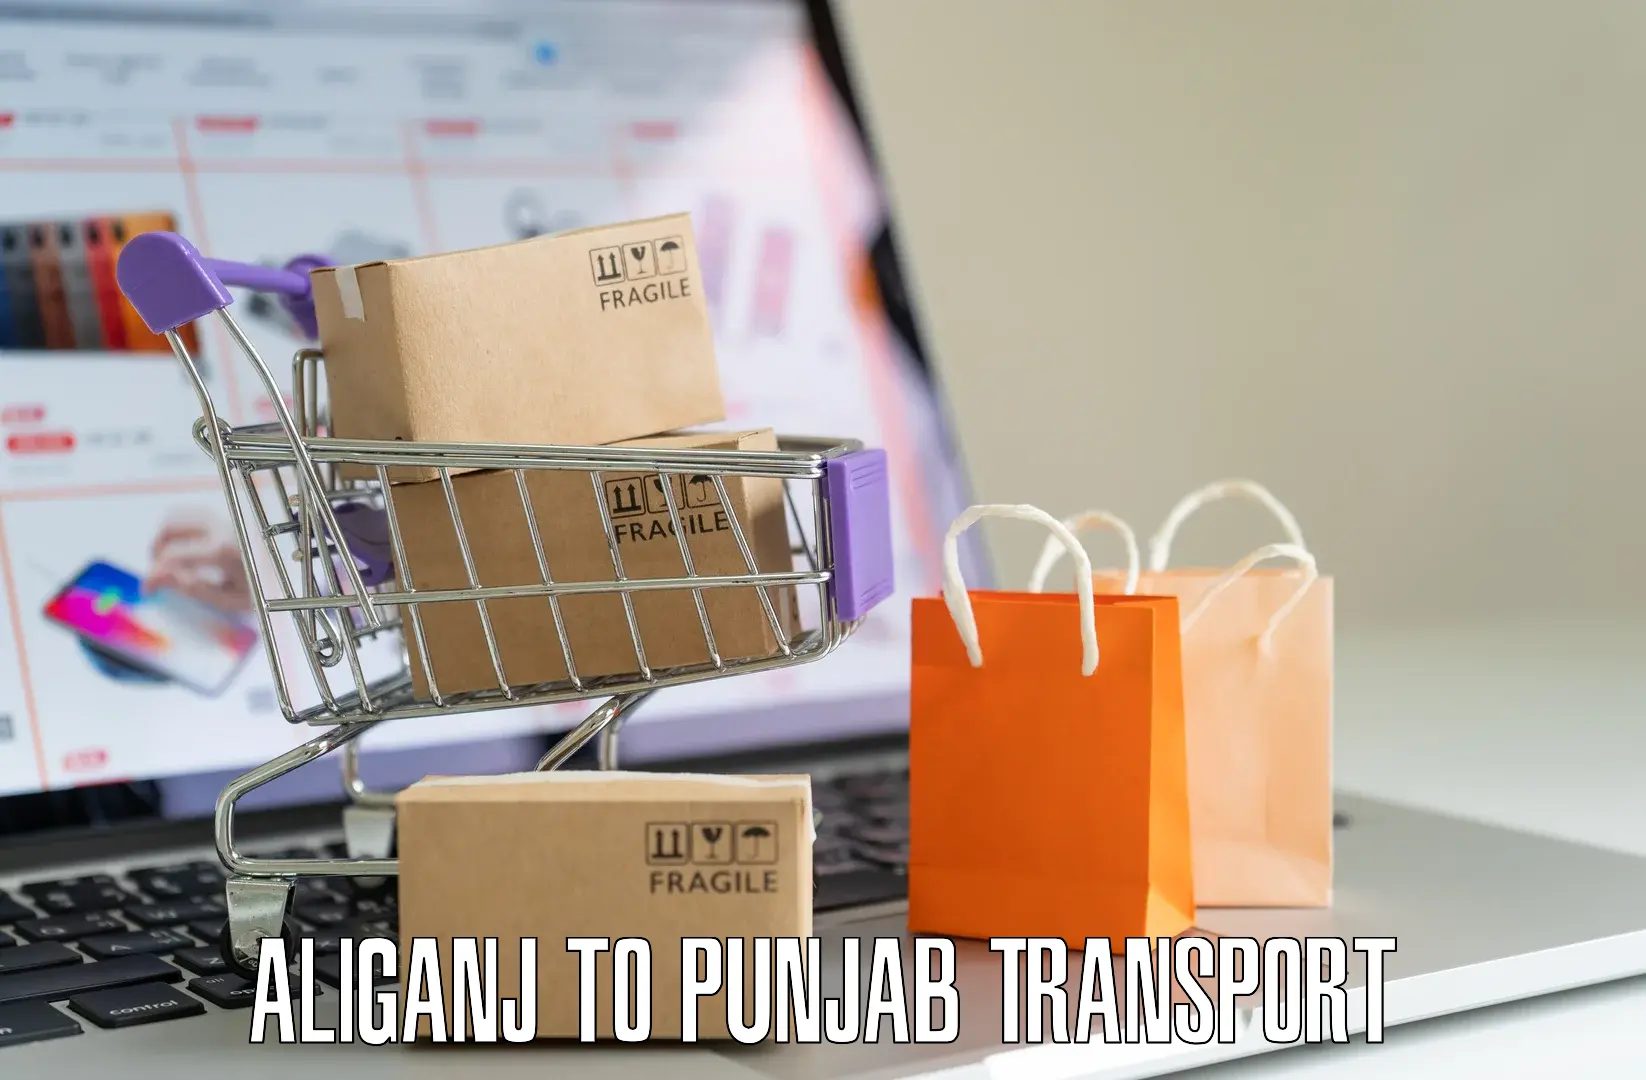 Transport bike from one state to another Aliganj to Punjab